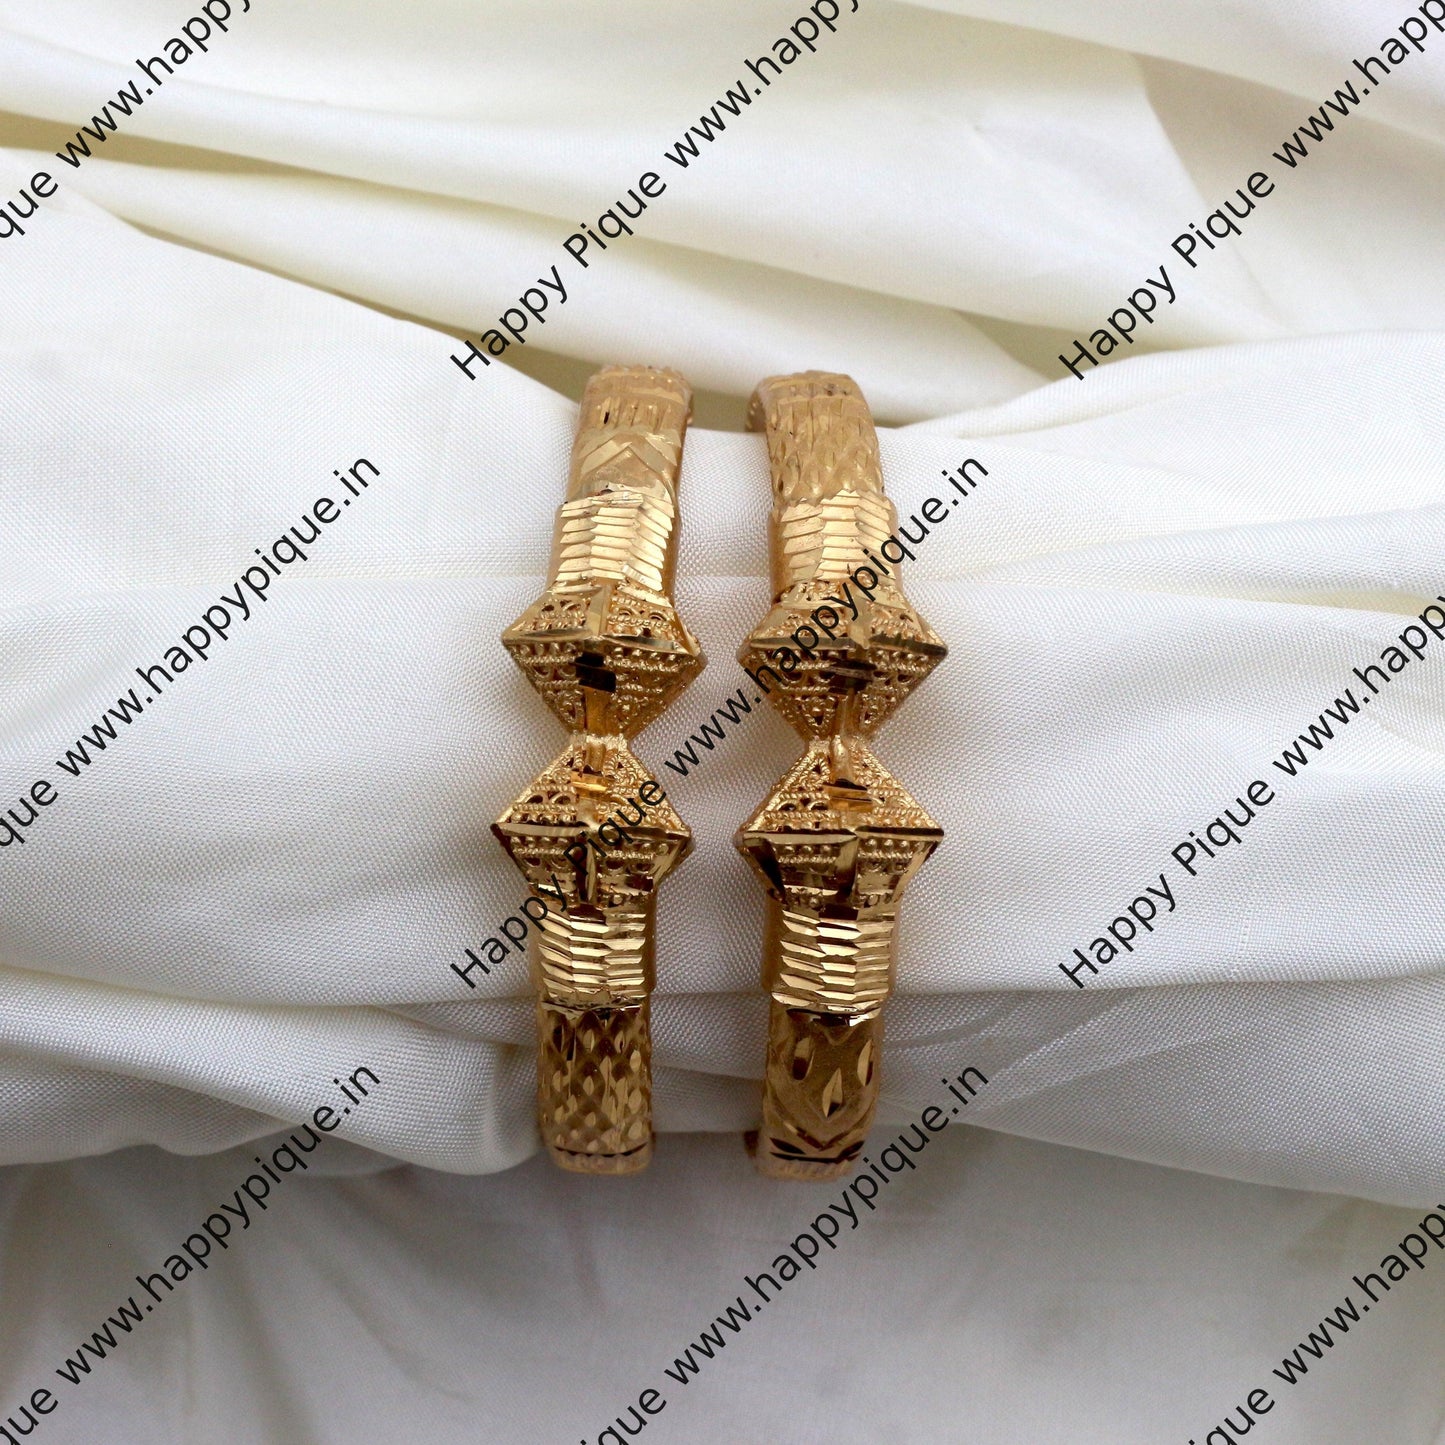 Real Gold Tone Thick Kada Bangles - SS008 - Daily Wear/Office Wear/Function Wear Bangles